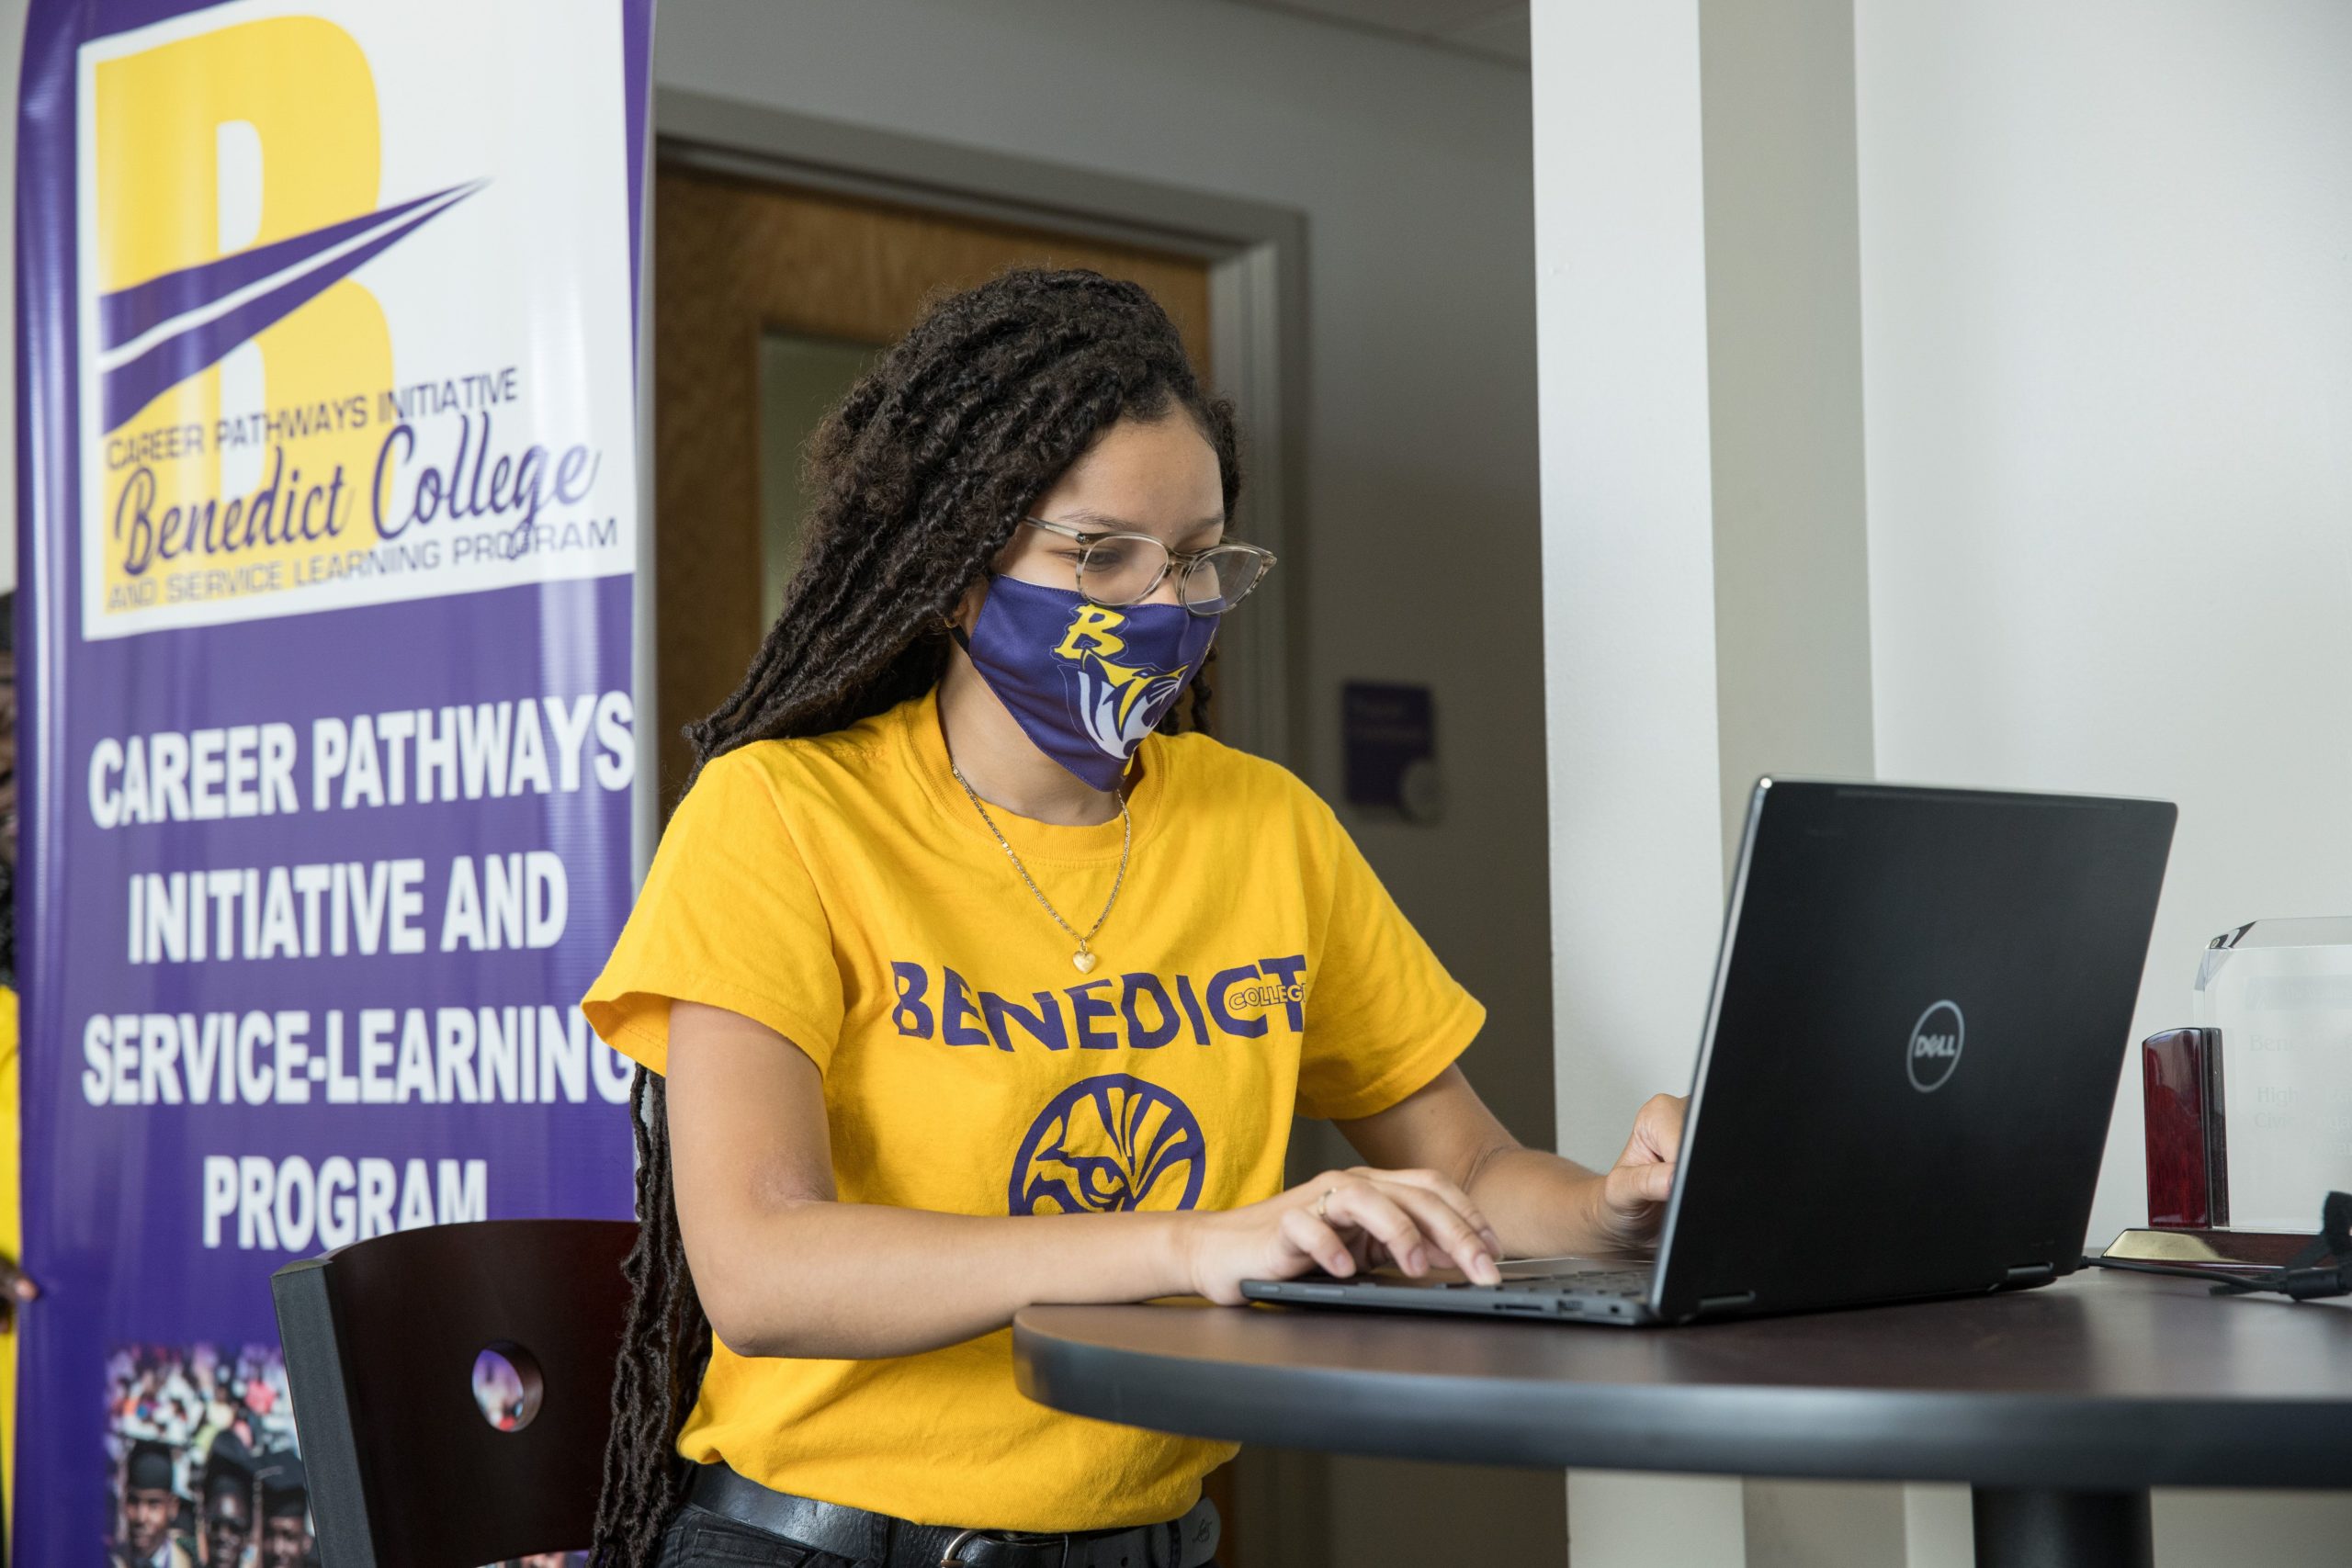 Student wearing a BC t-shirt and mask works on a laptop.